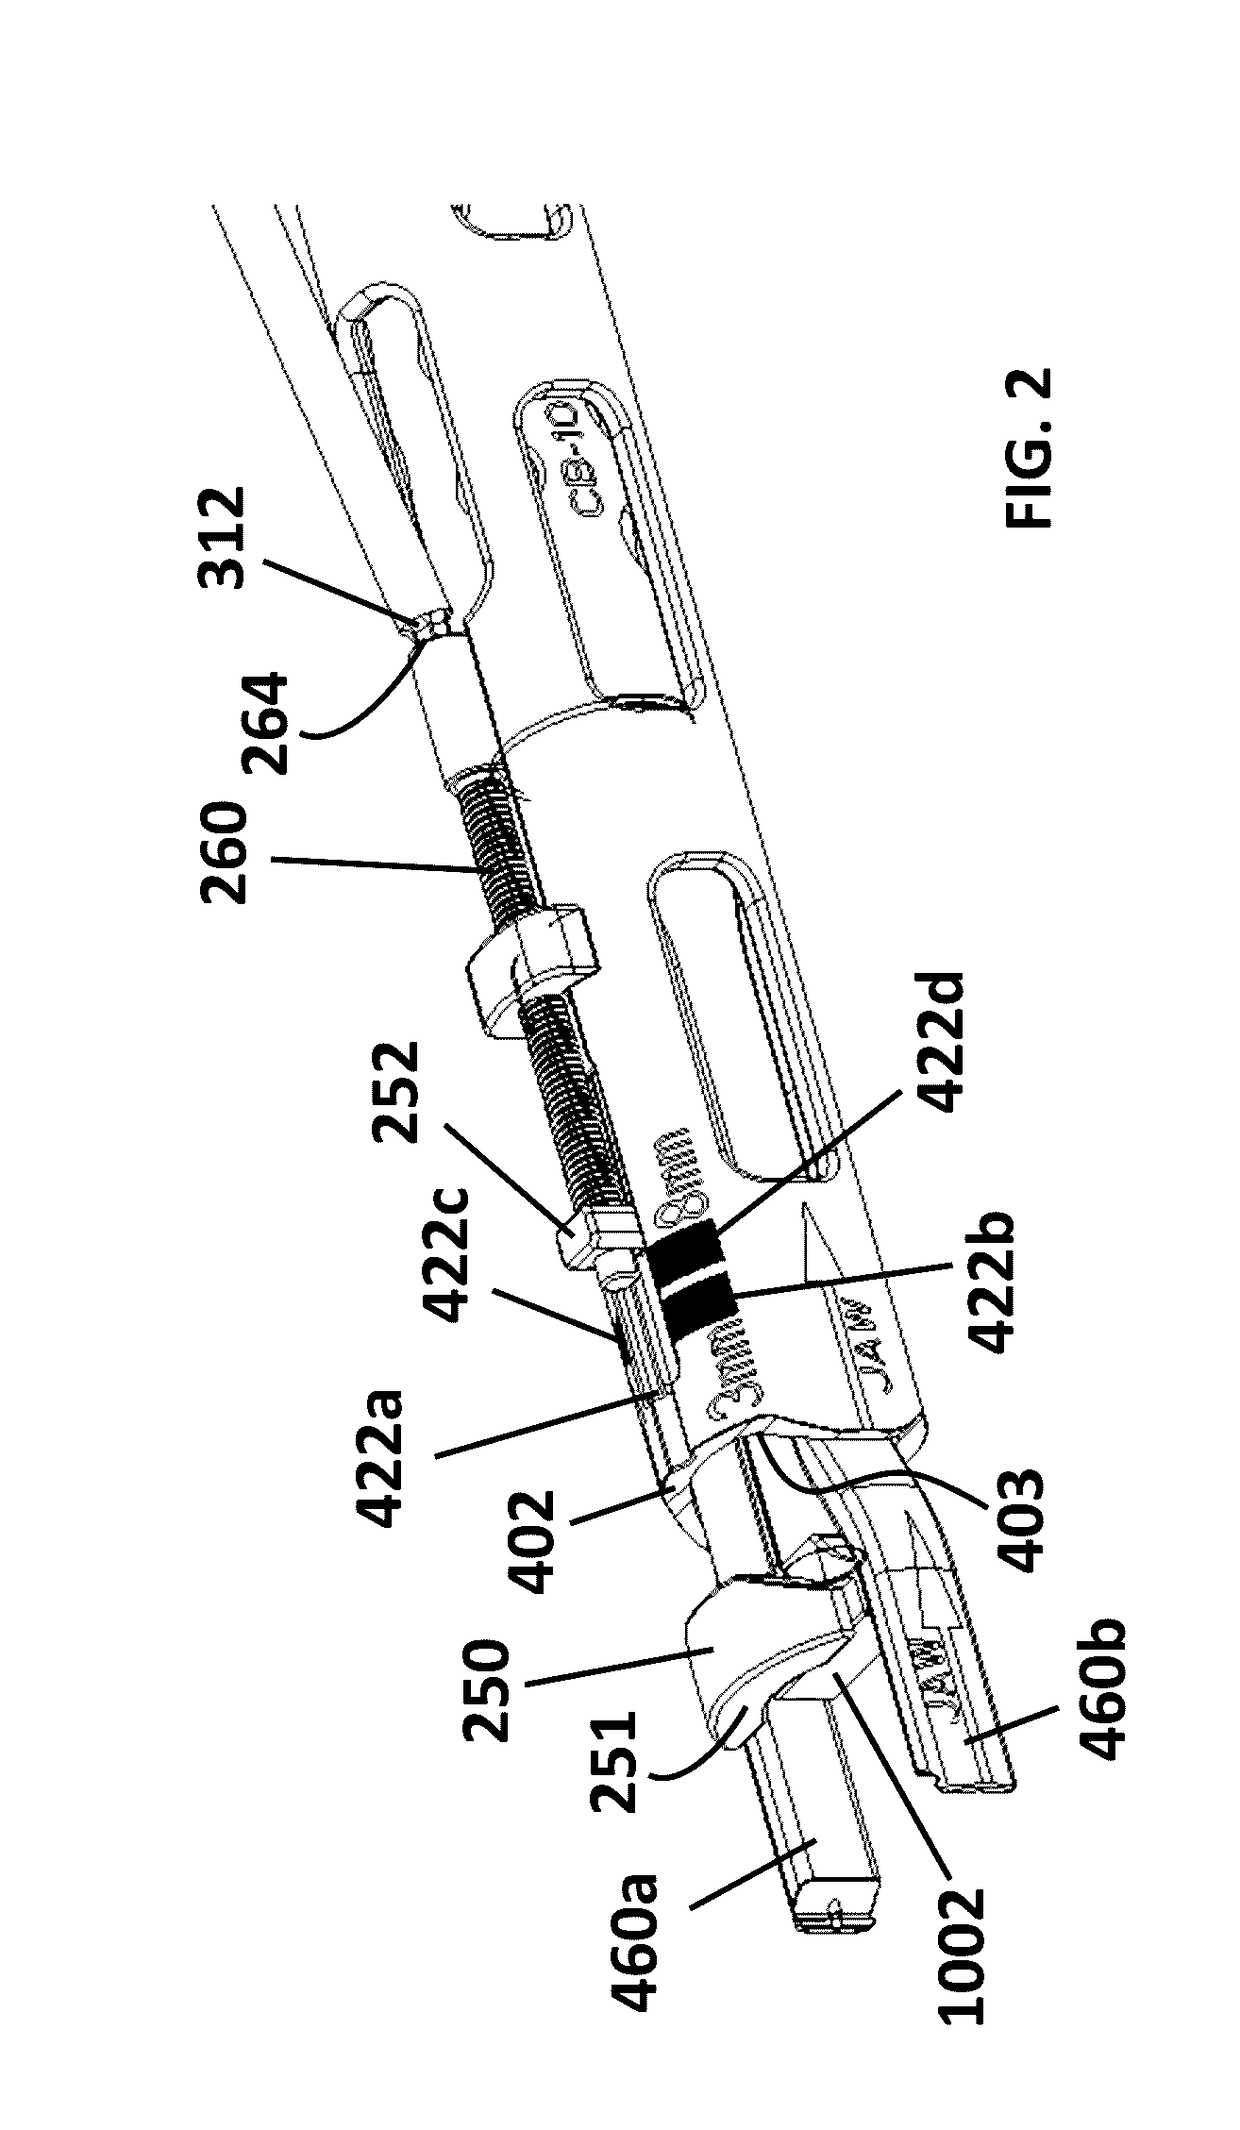 Insertion tool for implant and methods of use